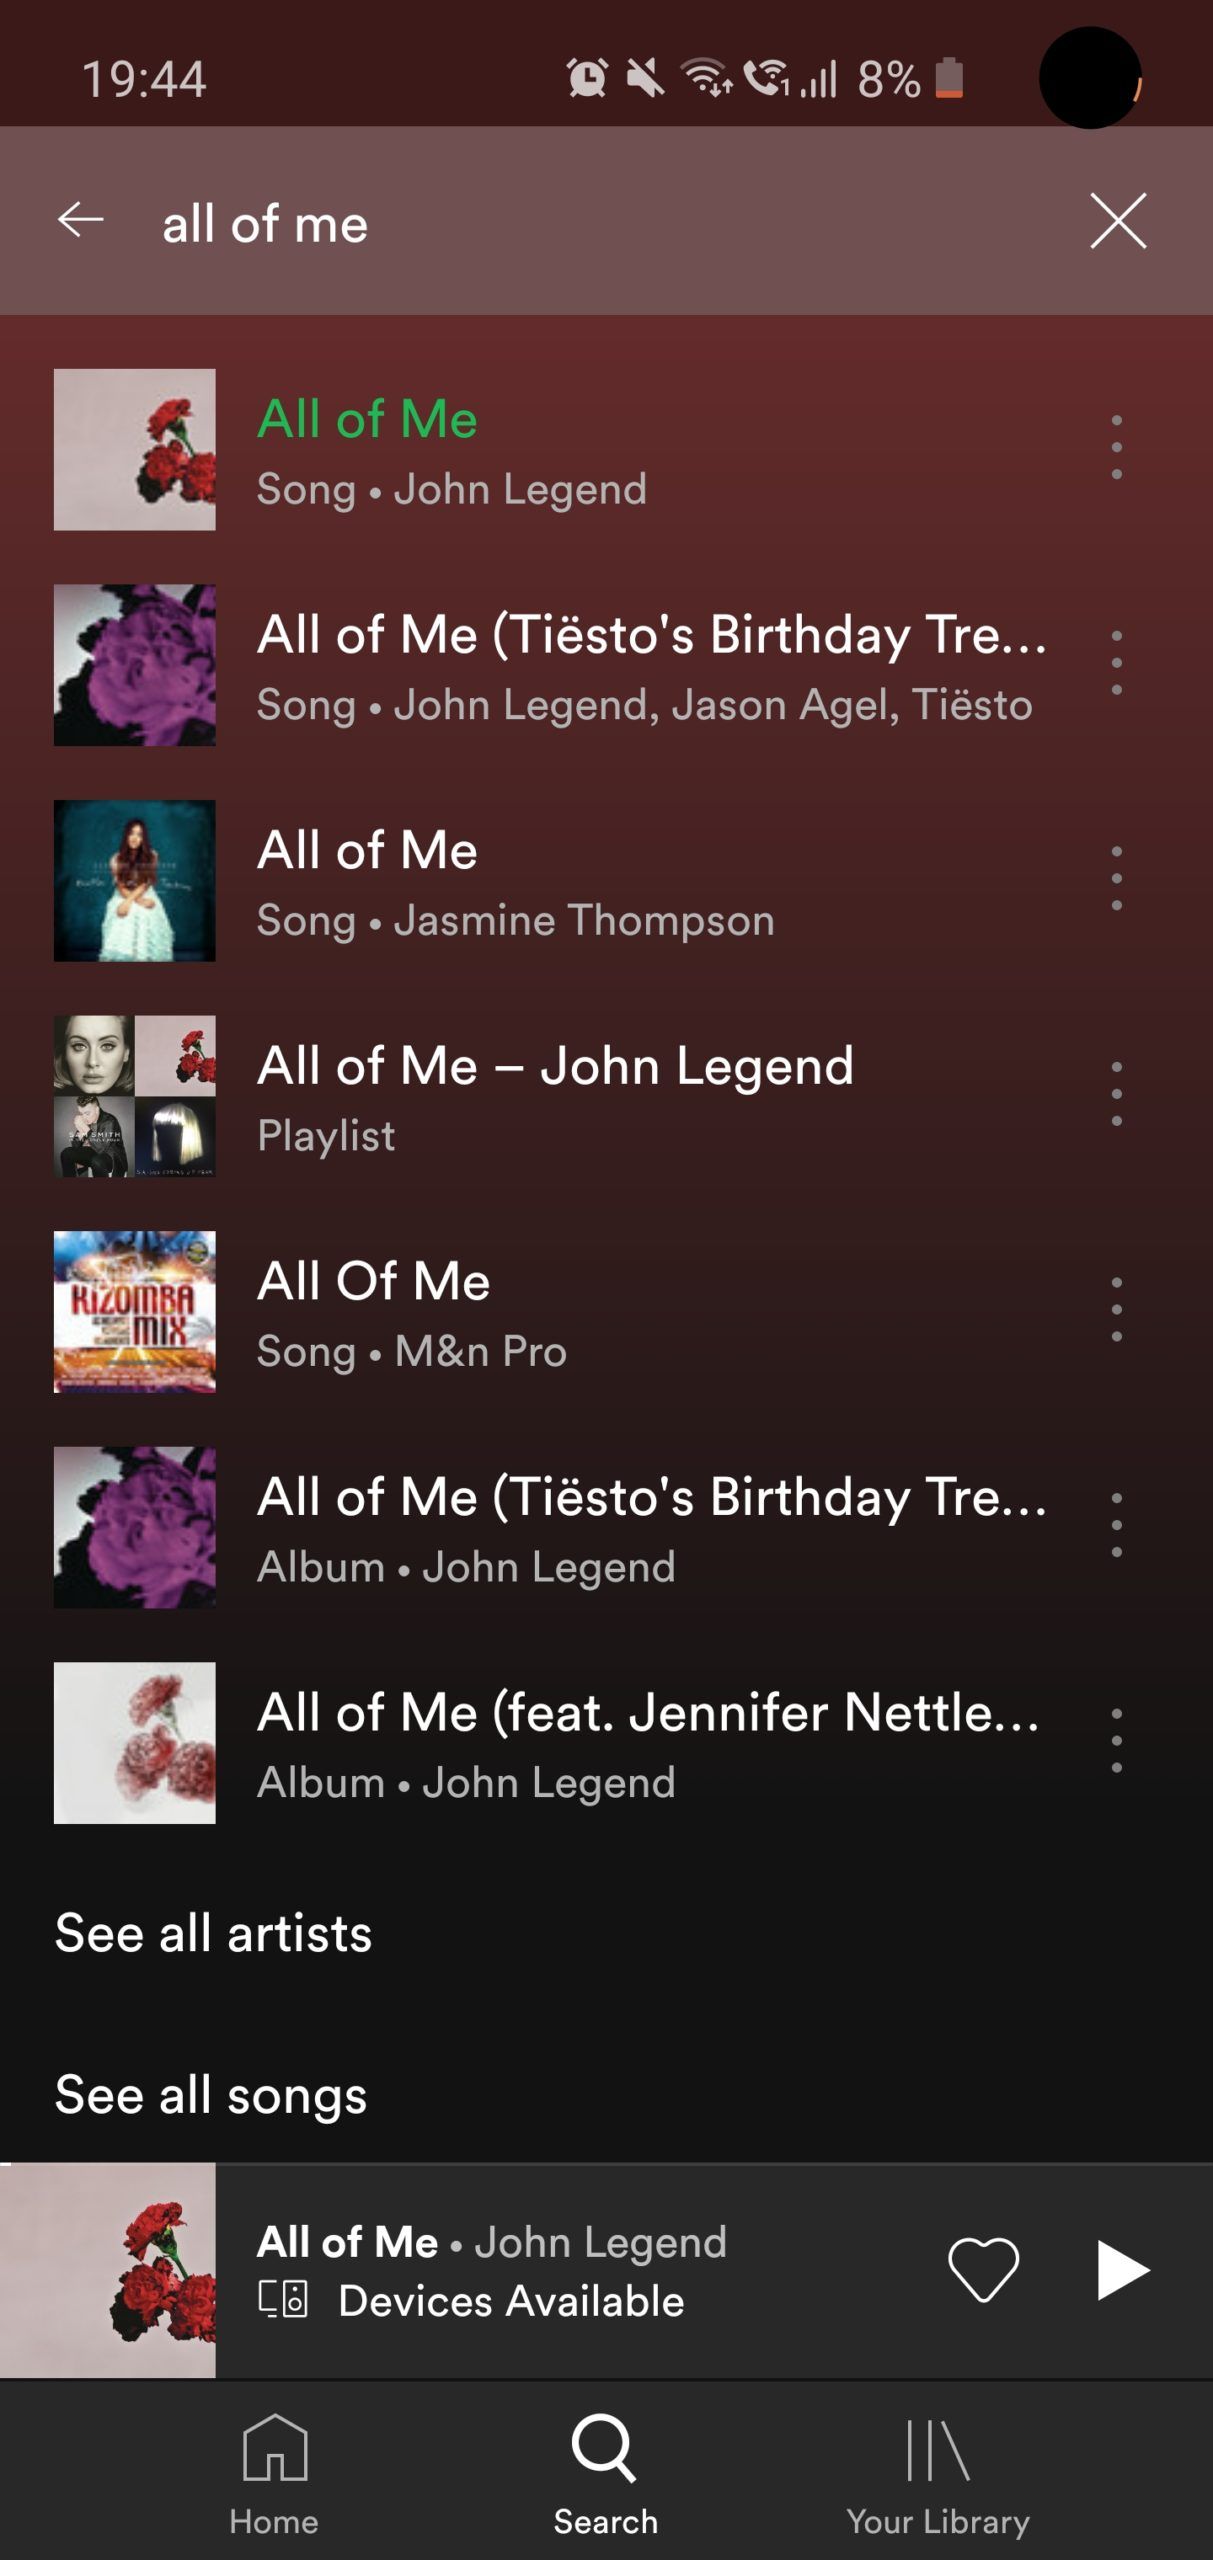 Search results in Spotify